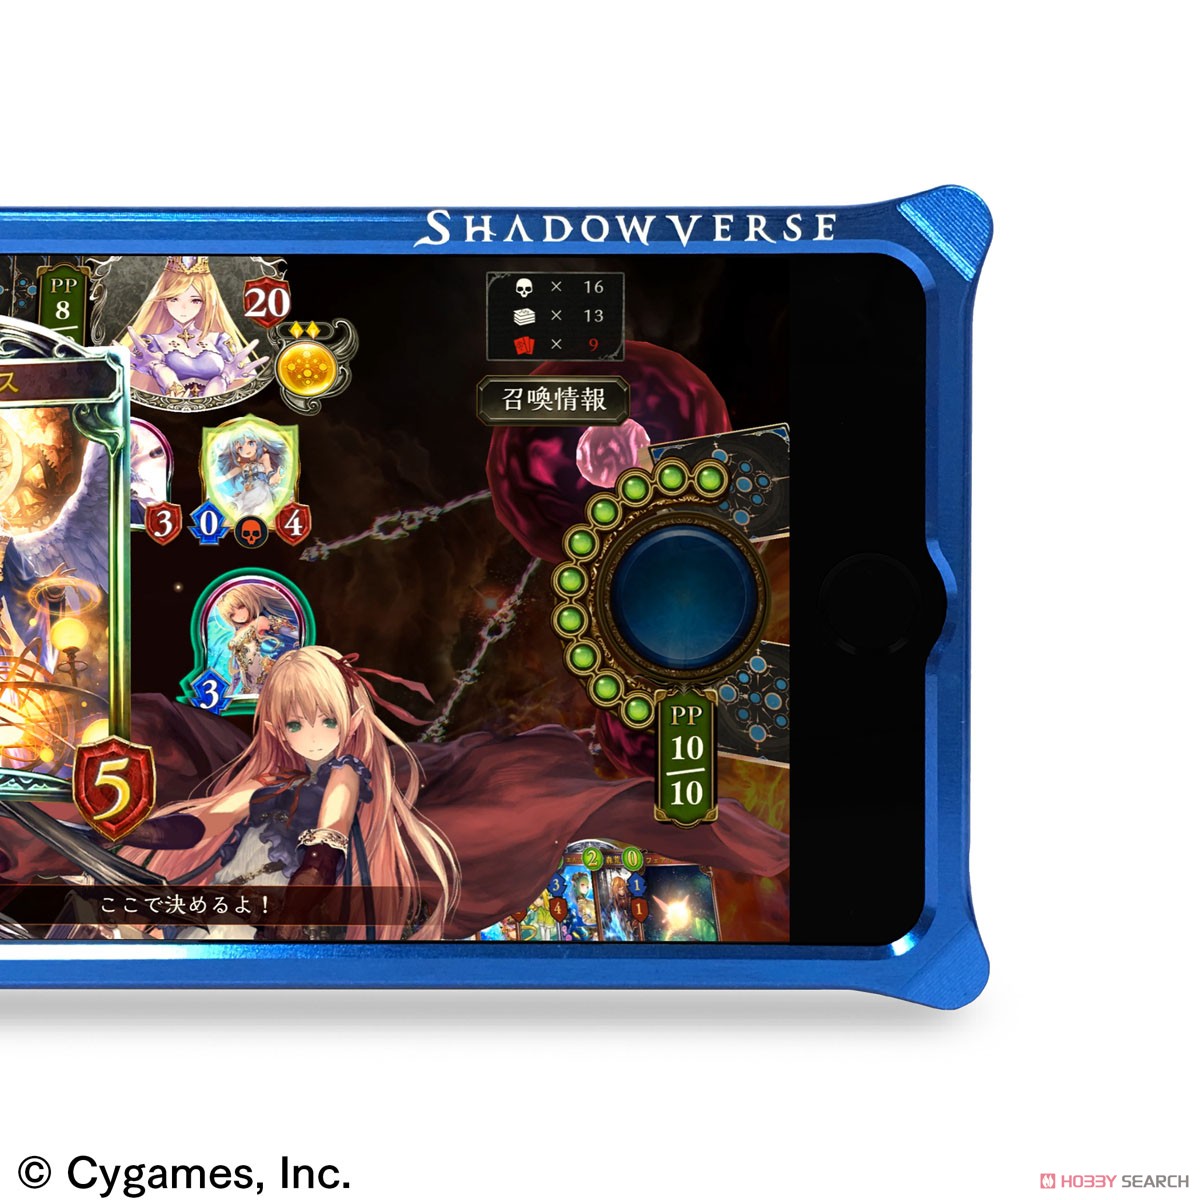 Shadowverse ソリッドバンパー Shadowverse for iPhone 8 Plus/7 Plus Blue (キャラクターグッズ) その他の画像2